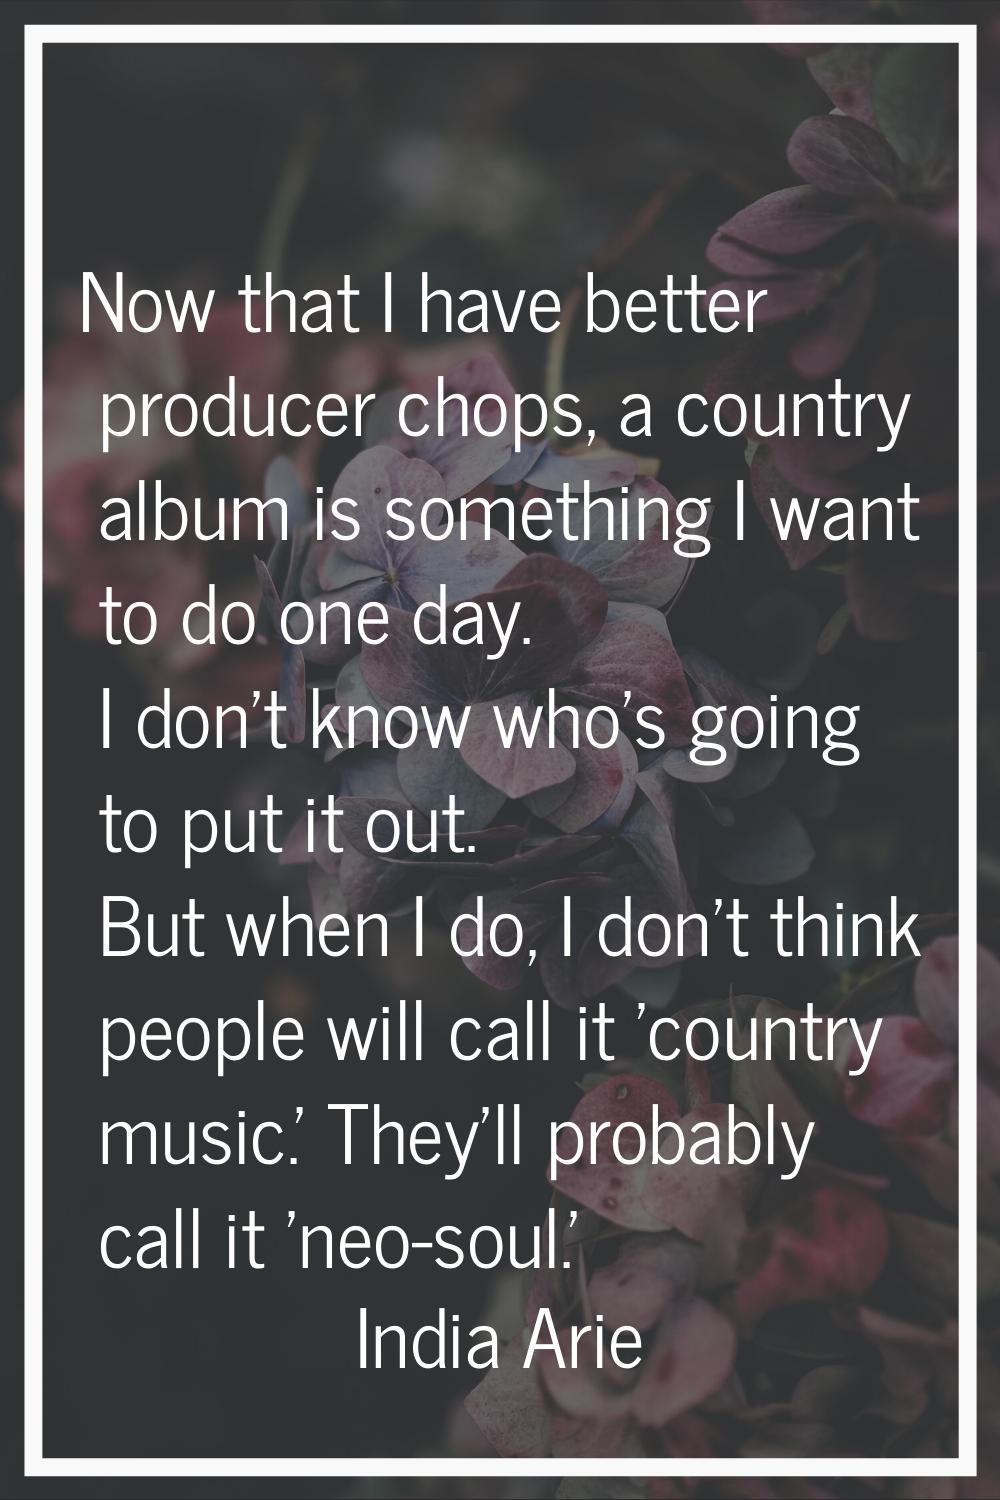 Now that I have better producer chops, a country album is something I want to do one day. I don't k